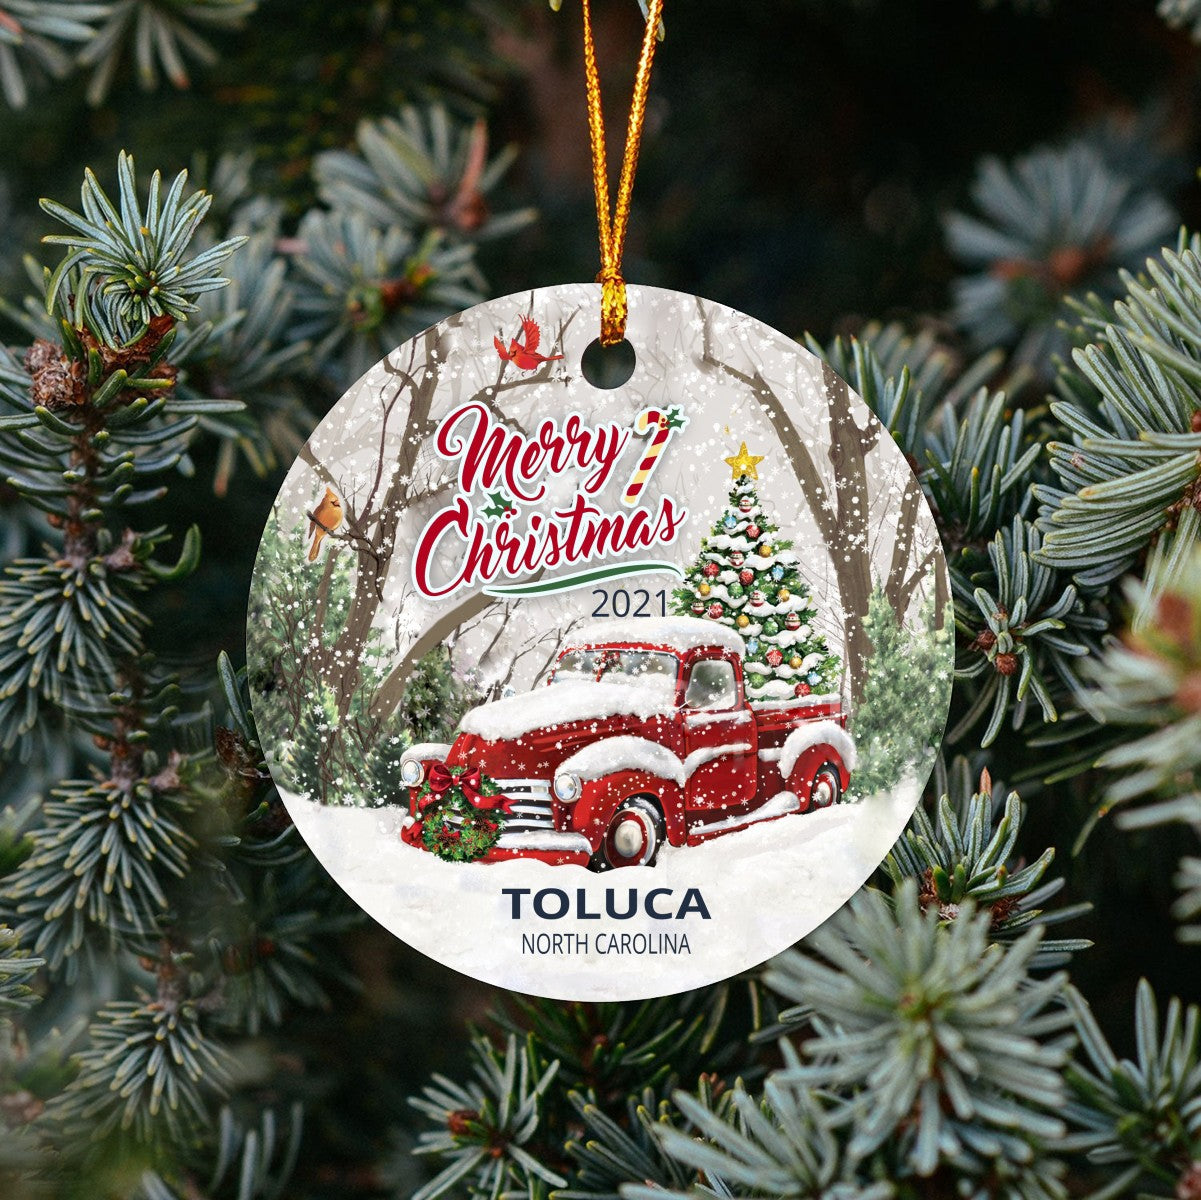 Christmas Tree Ornaments Toluca - Ornament With Name City, State Toluca North Carolina NC Ornament - Red Truck Xmas Ornaments 3'' Plastic Gift For Family, Friend And Housewarming